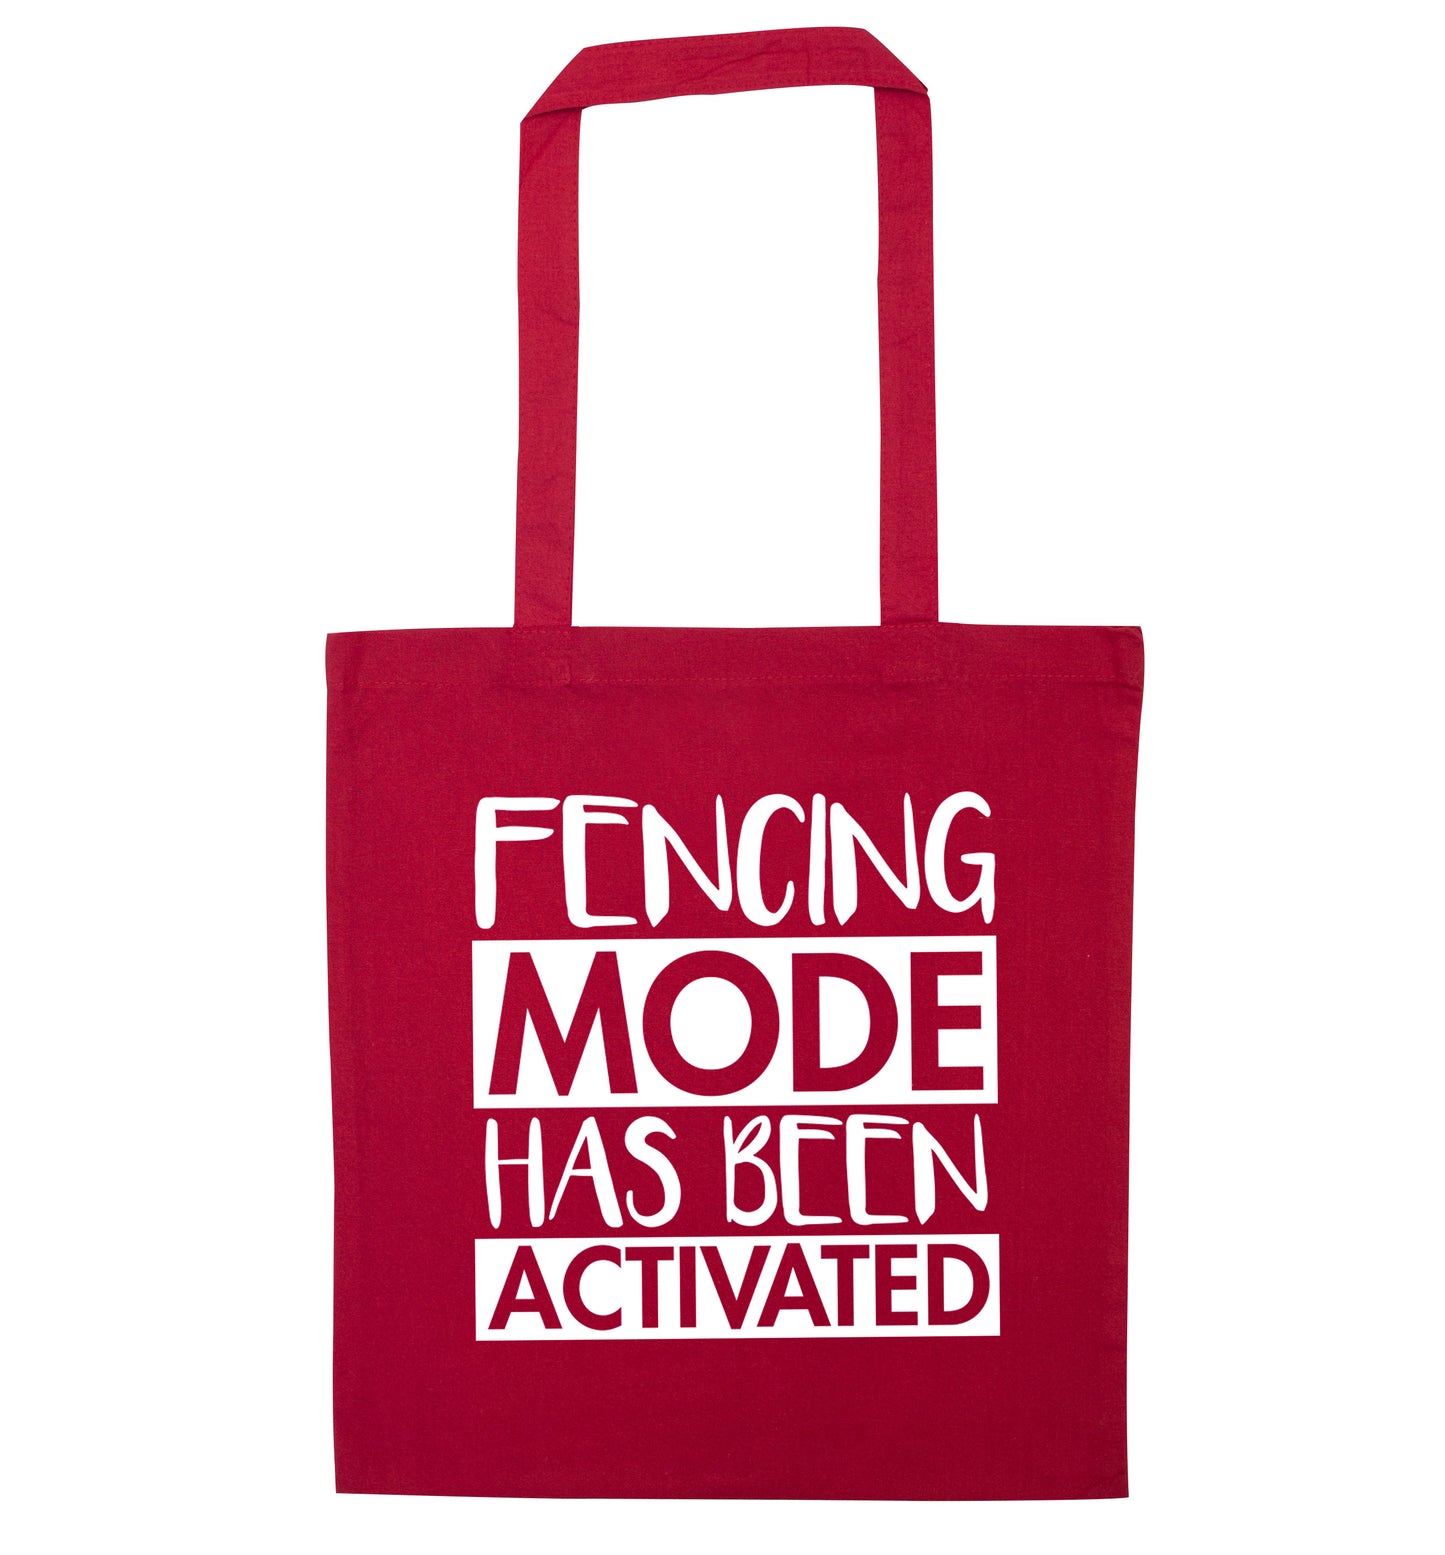 Fencing mode activated red tote bag